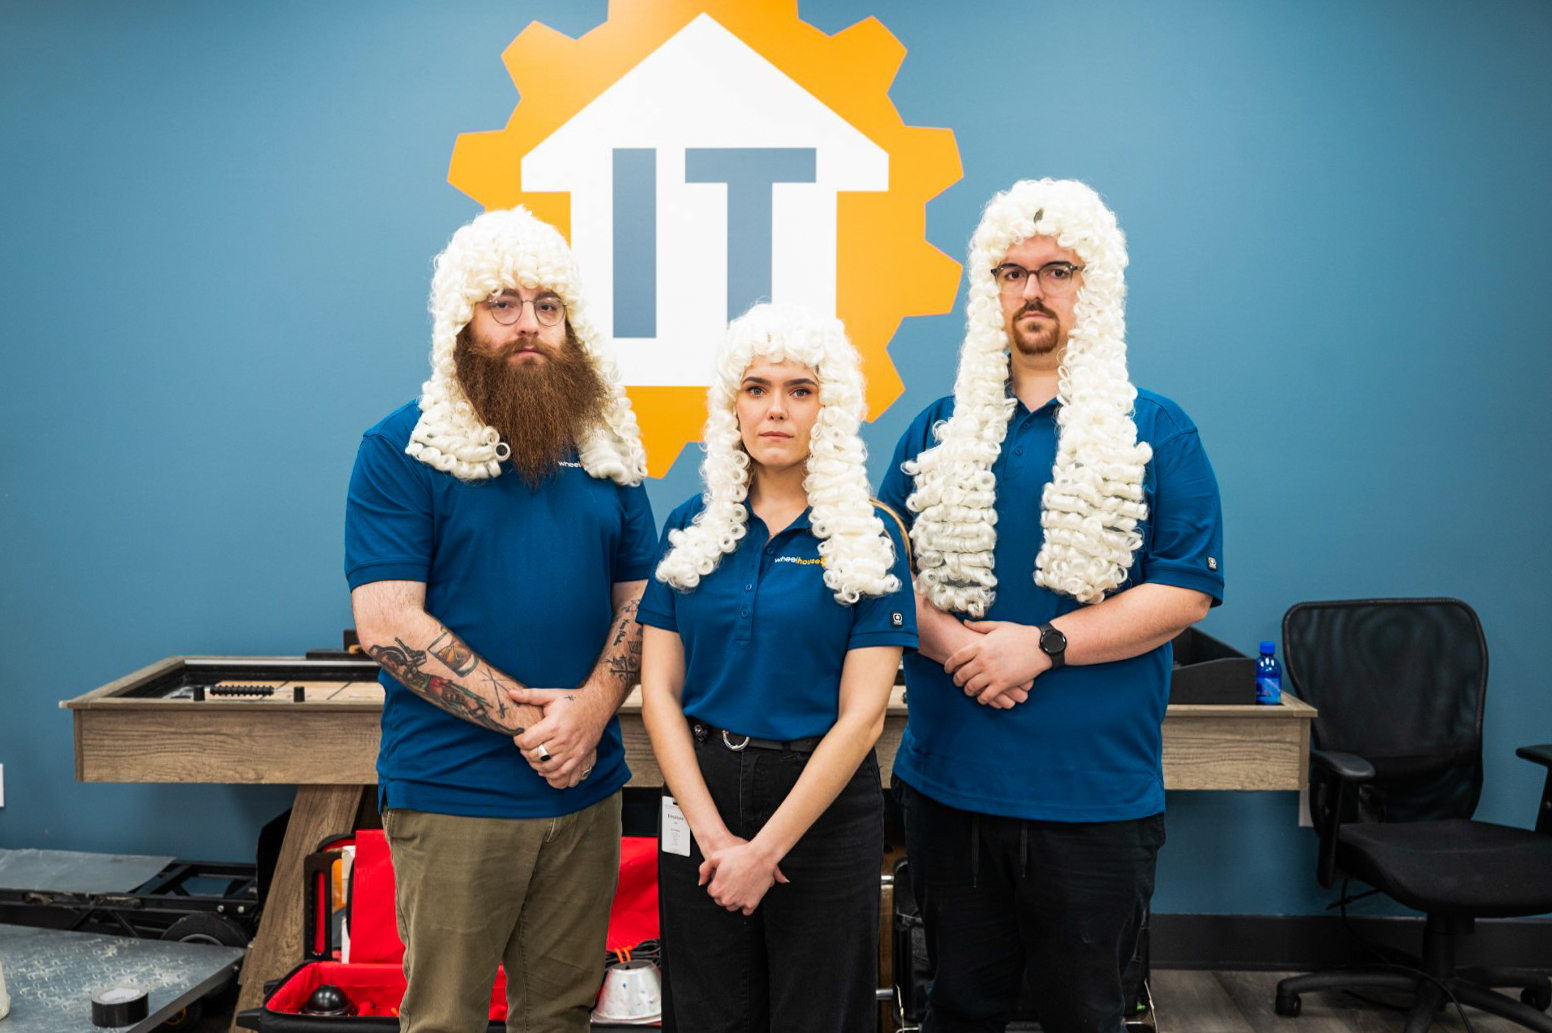 three people wearing wigs and beards in front of a blue wall